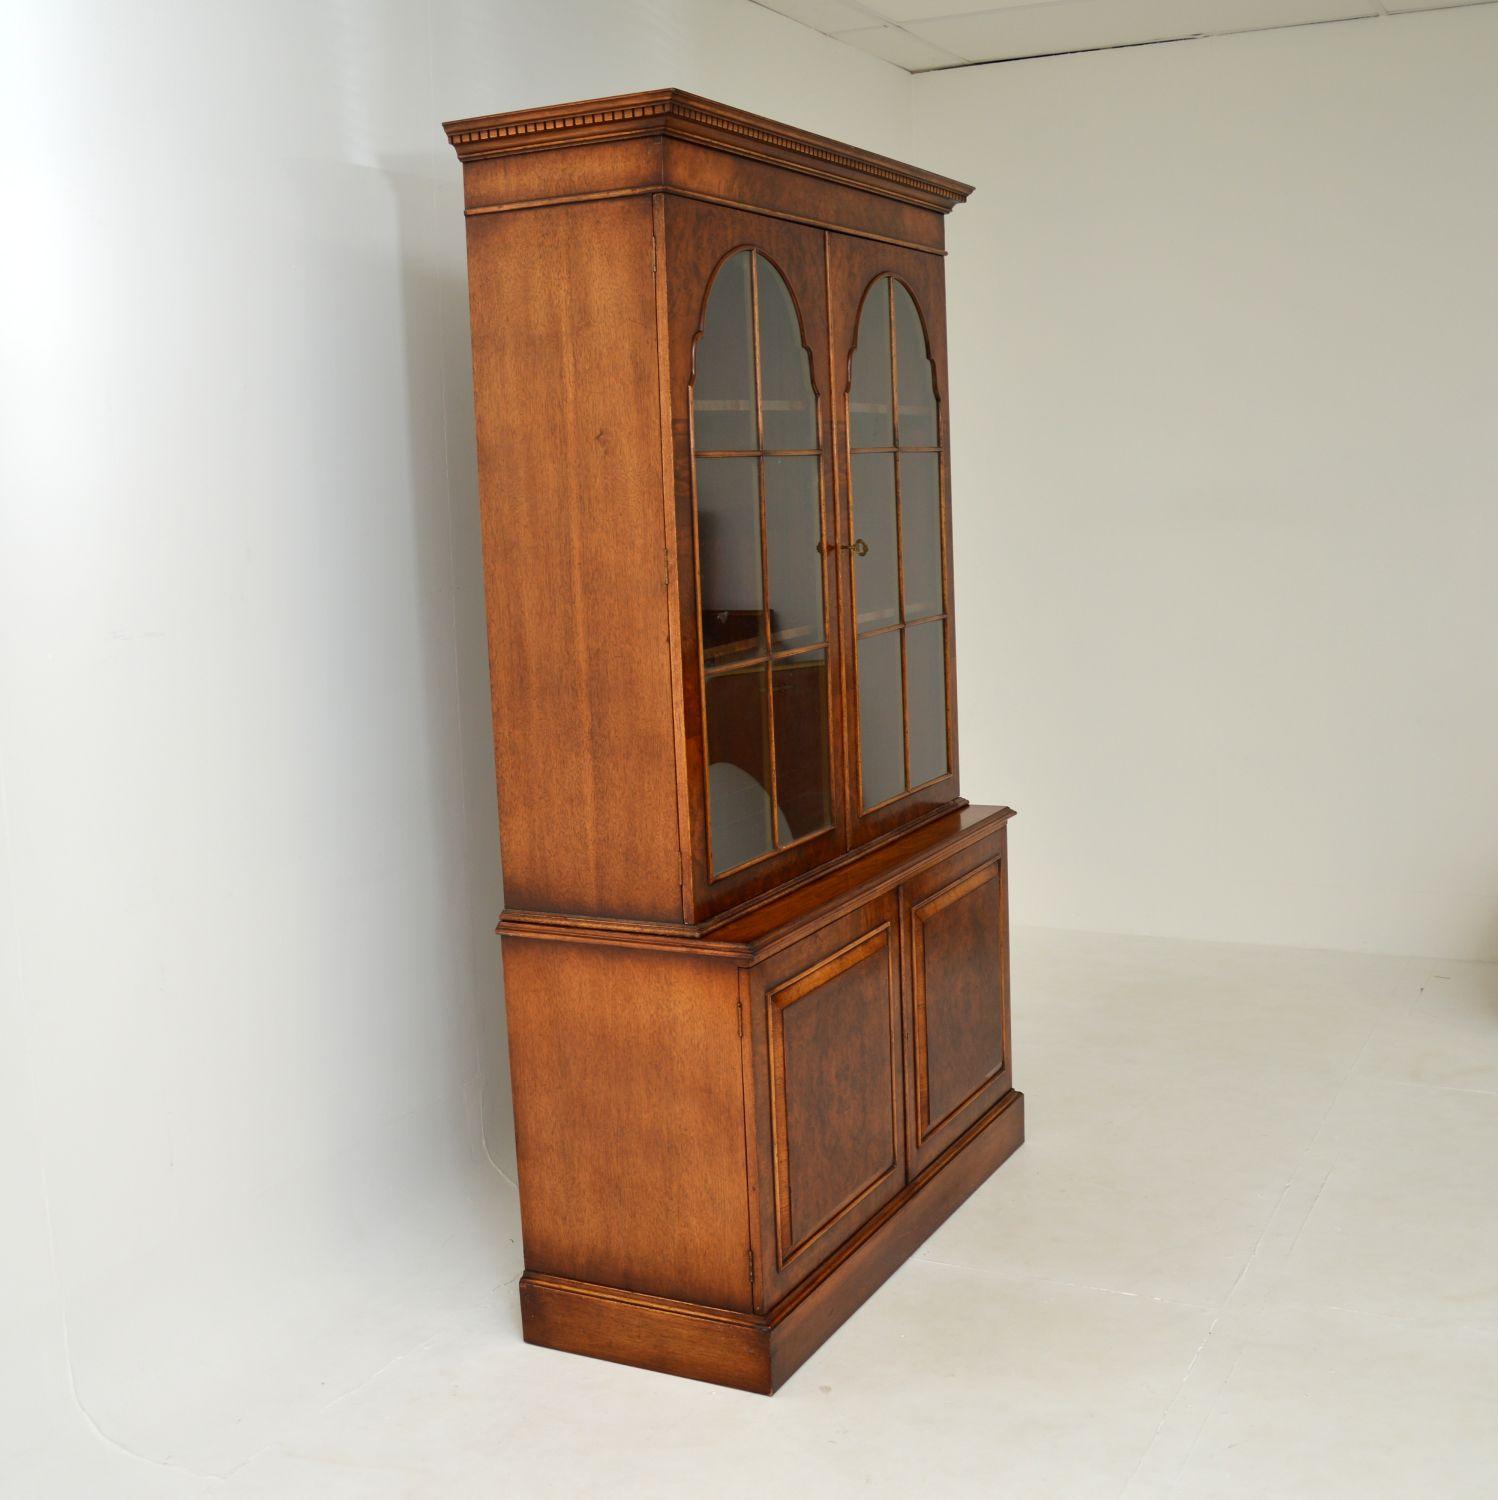 A fantastic antique bookcase in burr walnut, made in England and dating from around the 1930’s.

This is of exceptional quality, with a beautiful and impressive design. The front is finished in gorgeous burr walnut, with paneled lower doors and